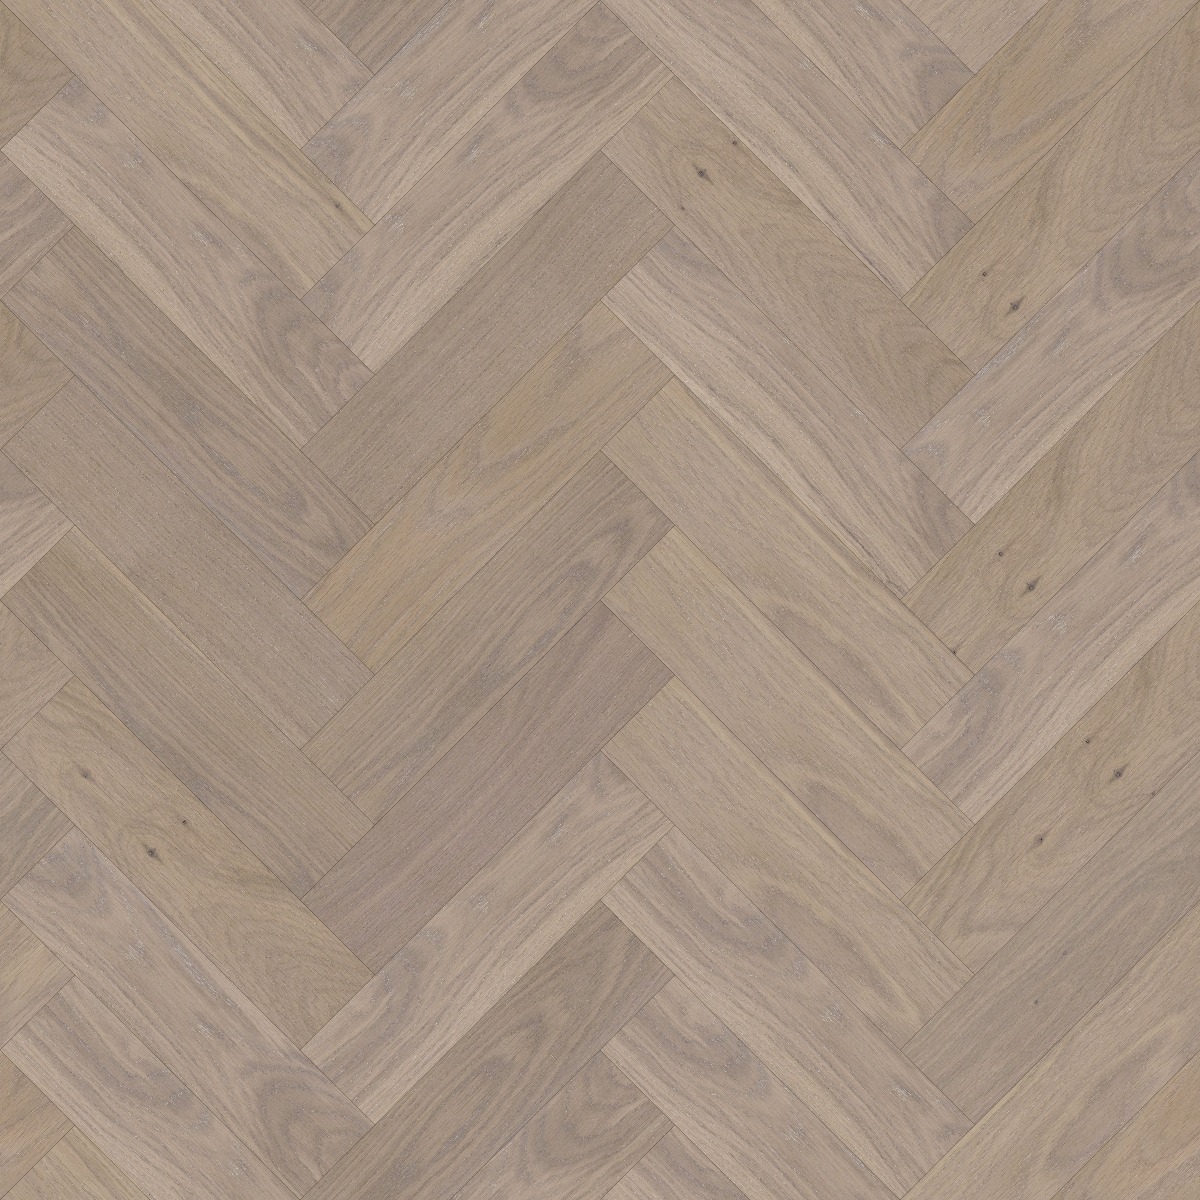 A seamless wood texture with expressive 55-102 boards arranged in a Herringbone pattern